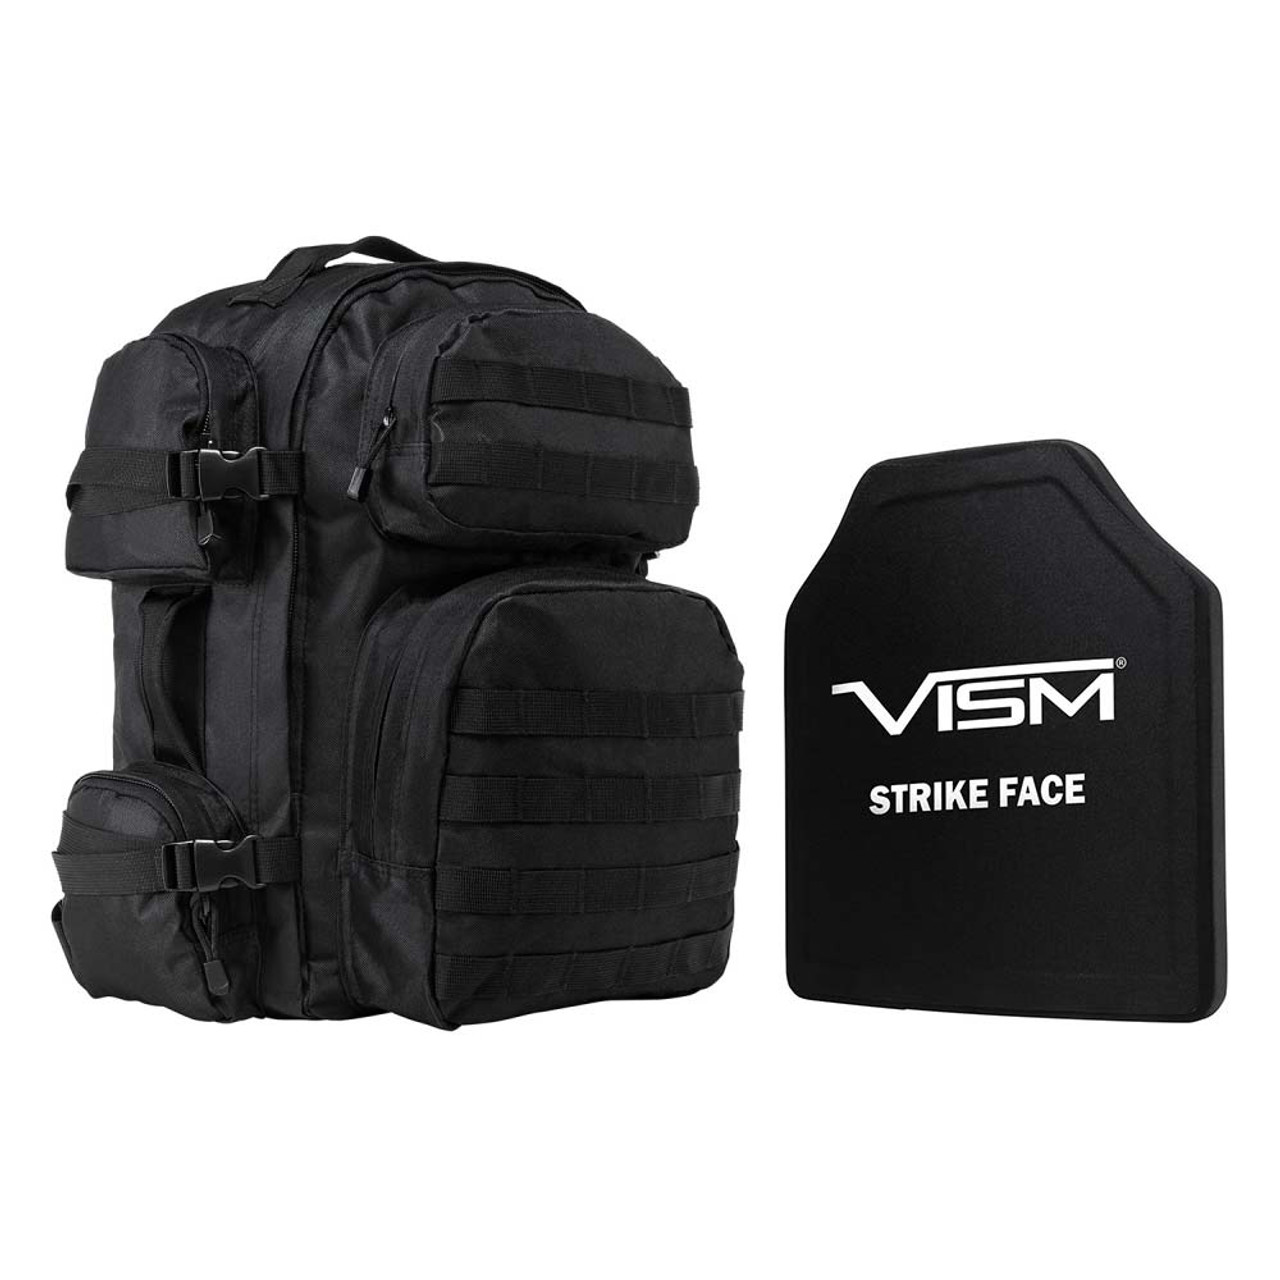 NcSTAR BPCBB2911-A Tactical Backpack With 10"X12" Level Iii+ Shooters Cut Pe Hard Ballistic Plate